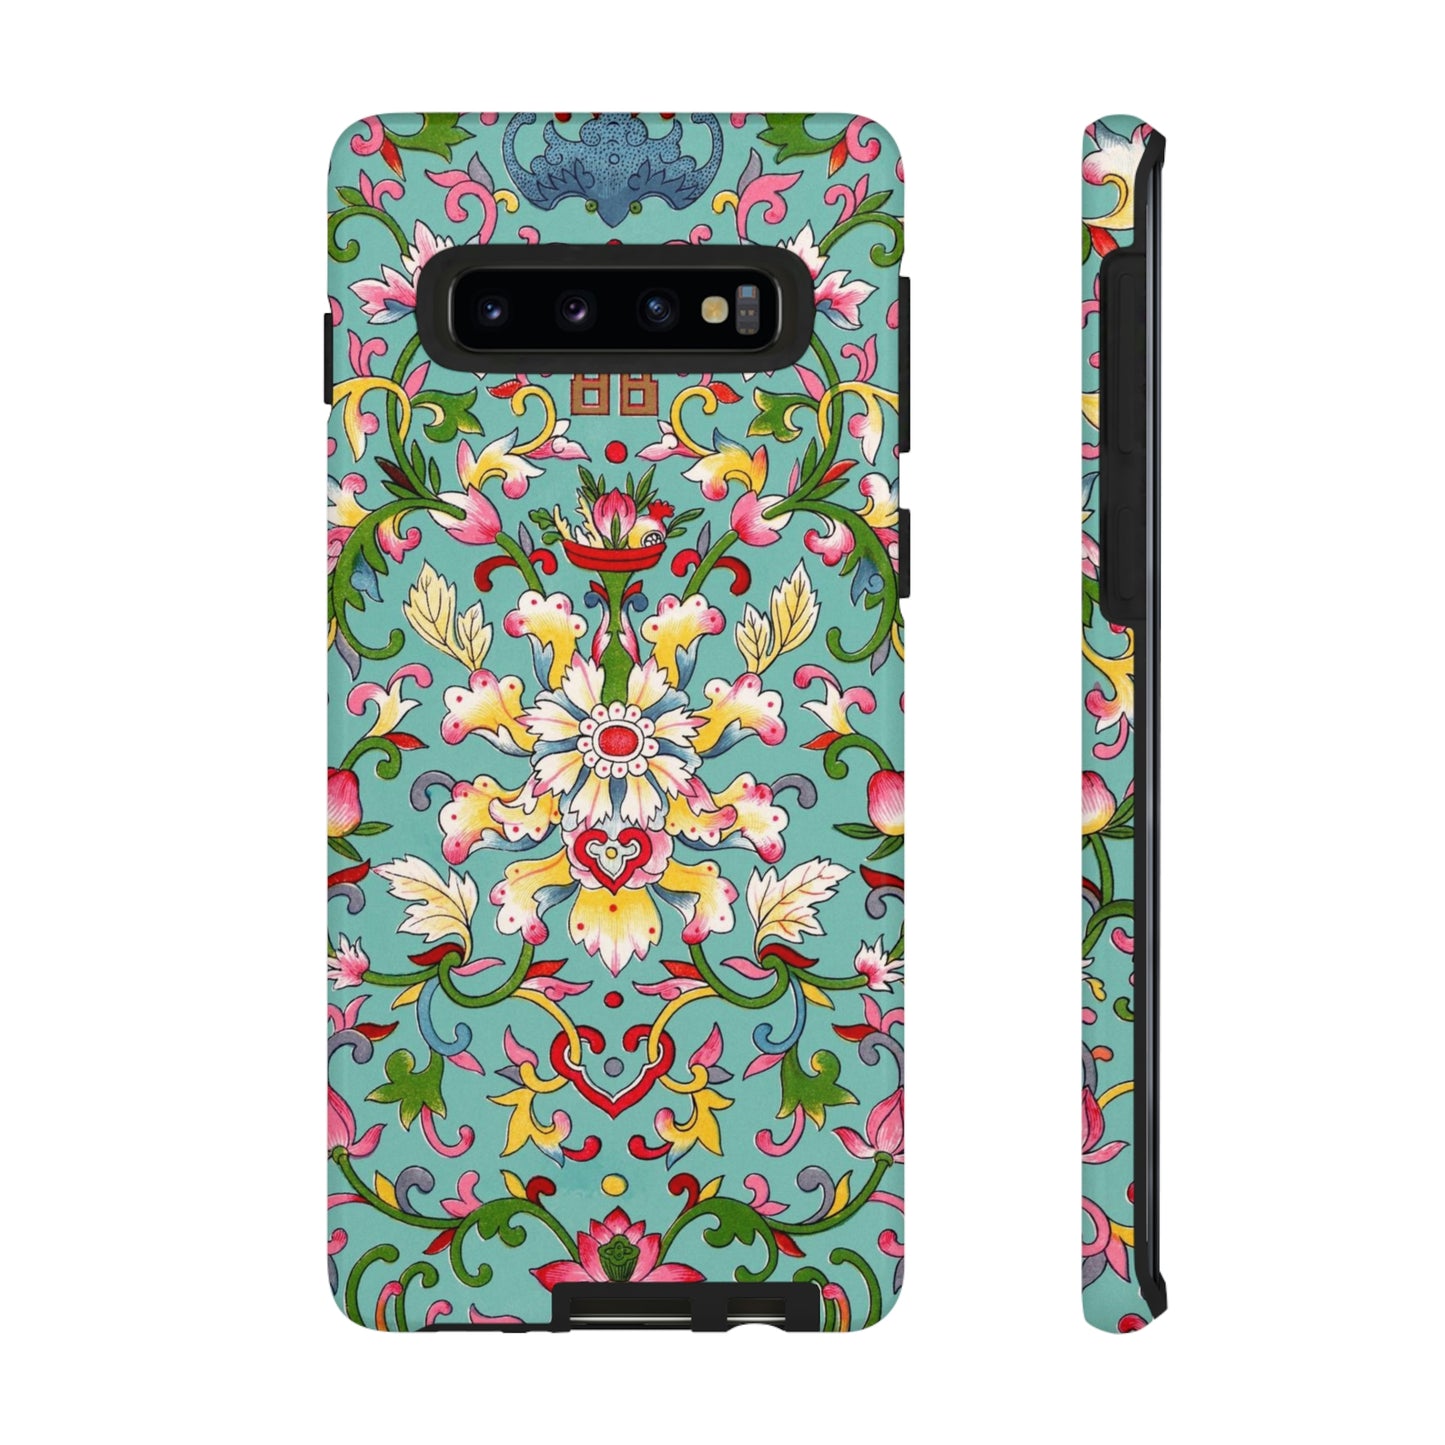 Floral Family Phone Case - BRYKNOLO LLC Phone Case Samsung Galaxy S10 / Glossy